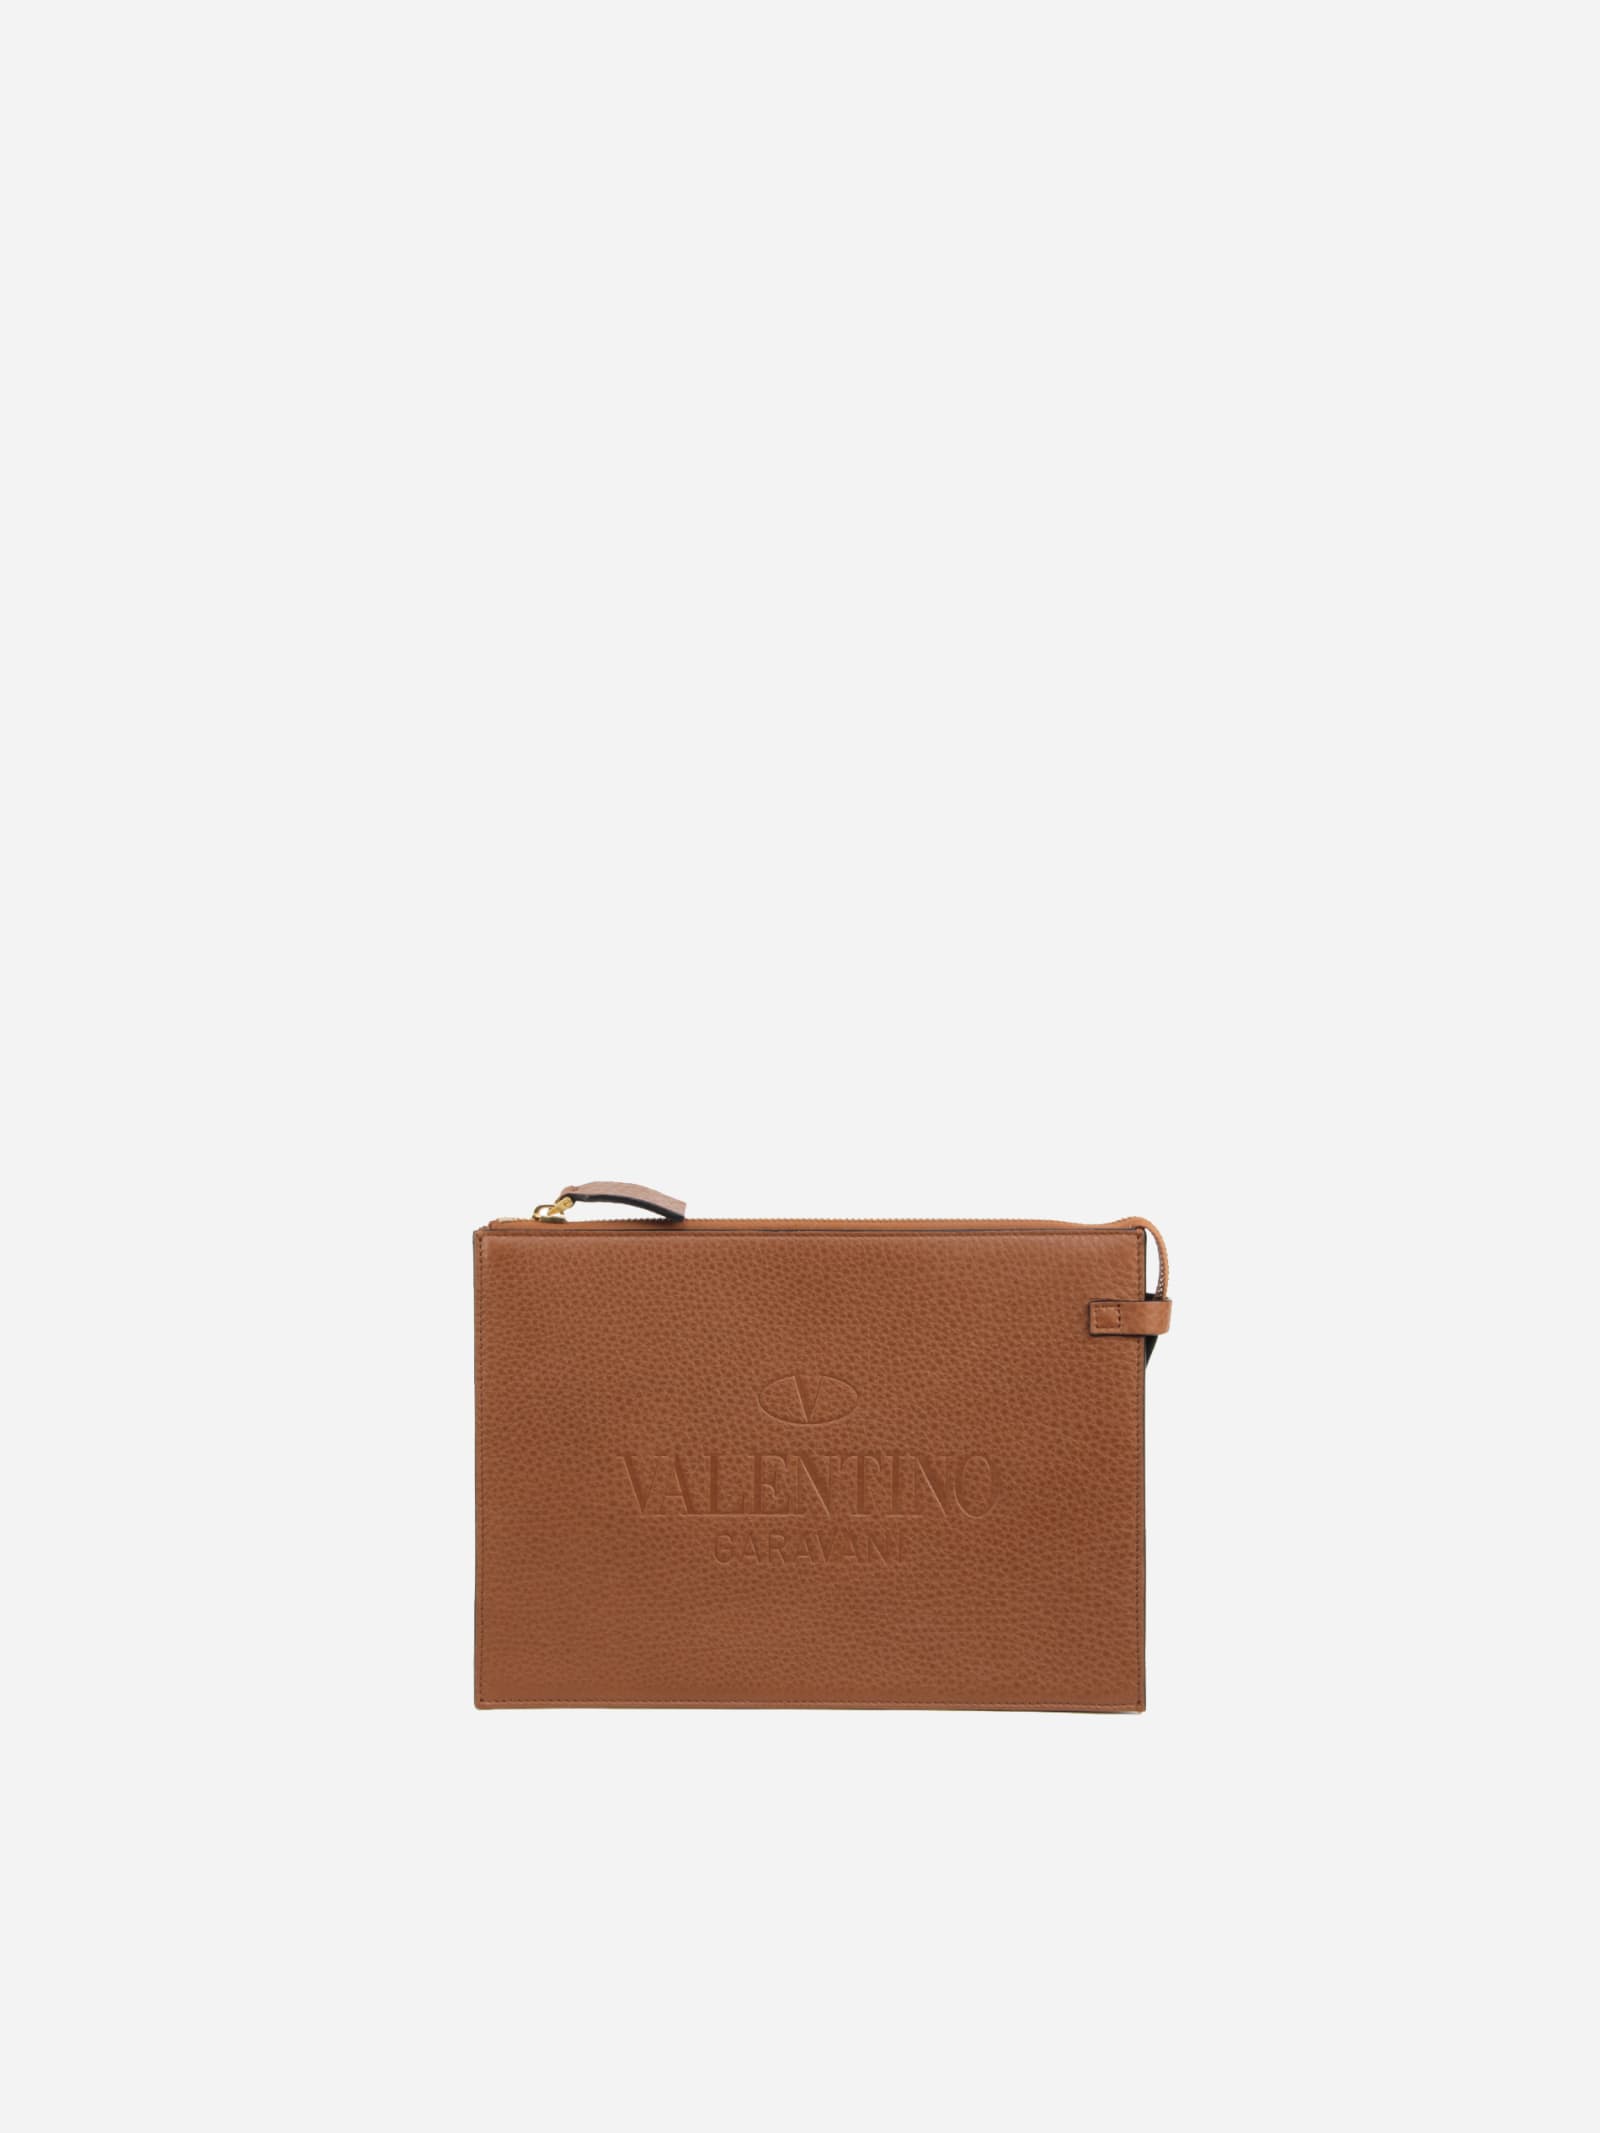 Valentino Garavani Pouch Made Of Leather With Embossed Logo